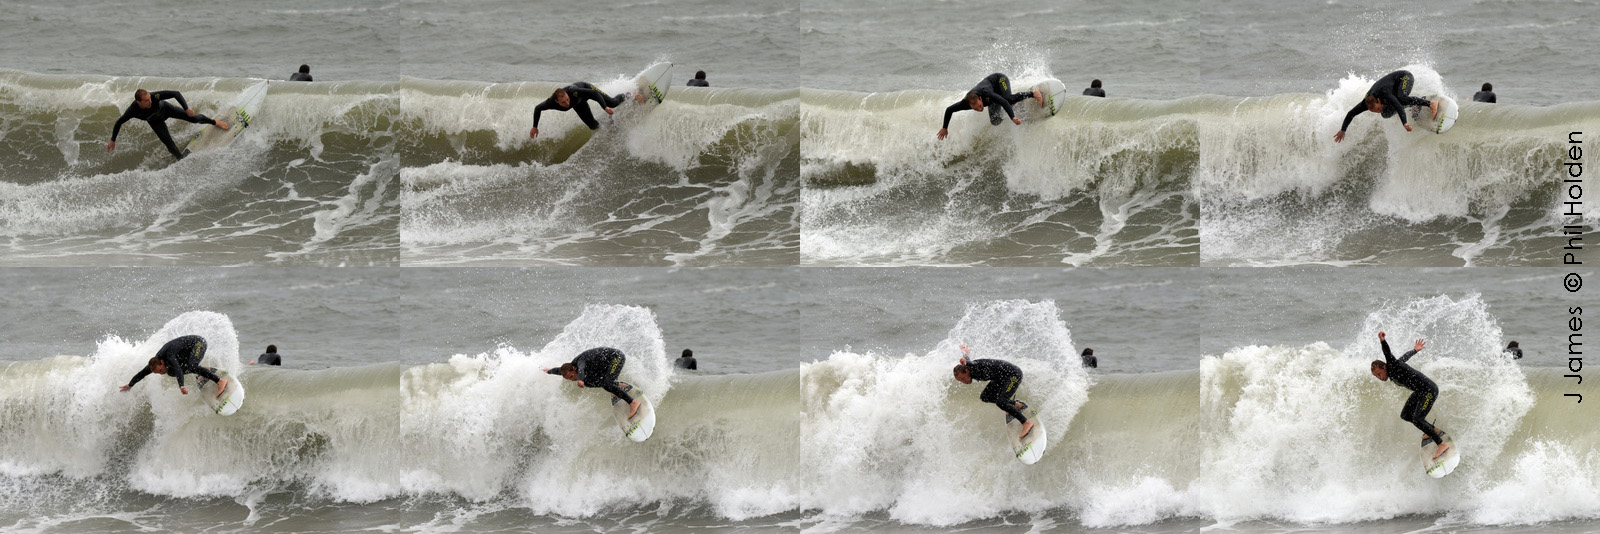 sequence of surfer on wave